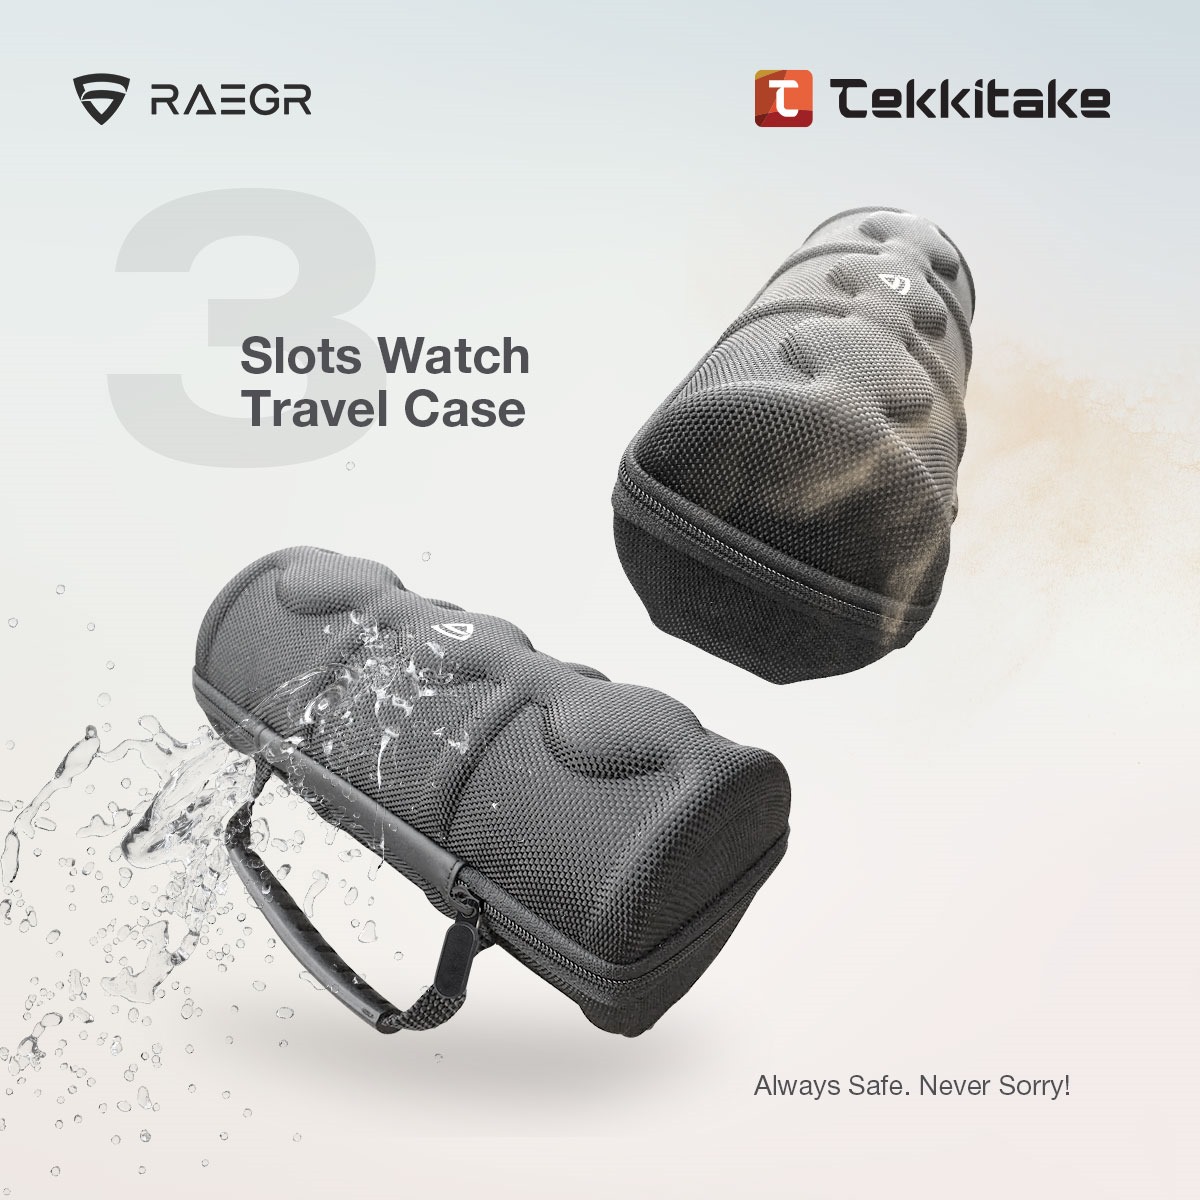 Enhanced with a watch roll and plush foam pillows, this travel case ensures your watches are kept safe and secure at all times

Buy Now!
Tekkitake:postly.app/3TLg
Amazon:postly.app/3TLh

#Tekkitake #Raegr #WatchTravelCase #TravelOrganizer